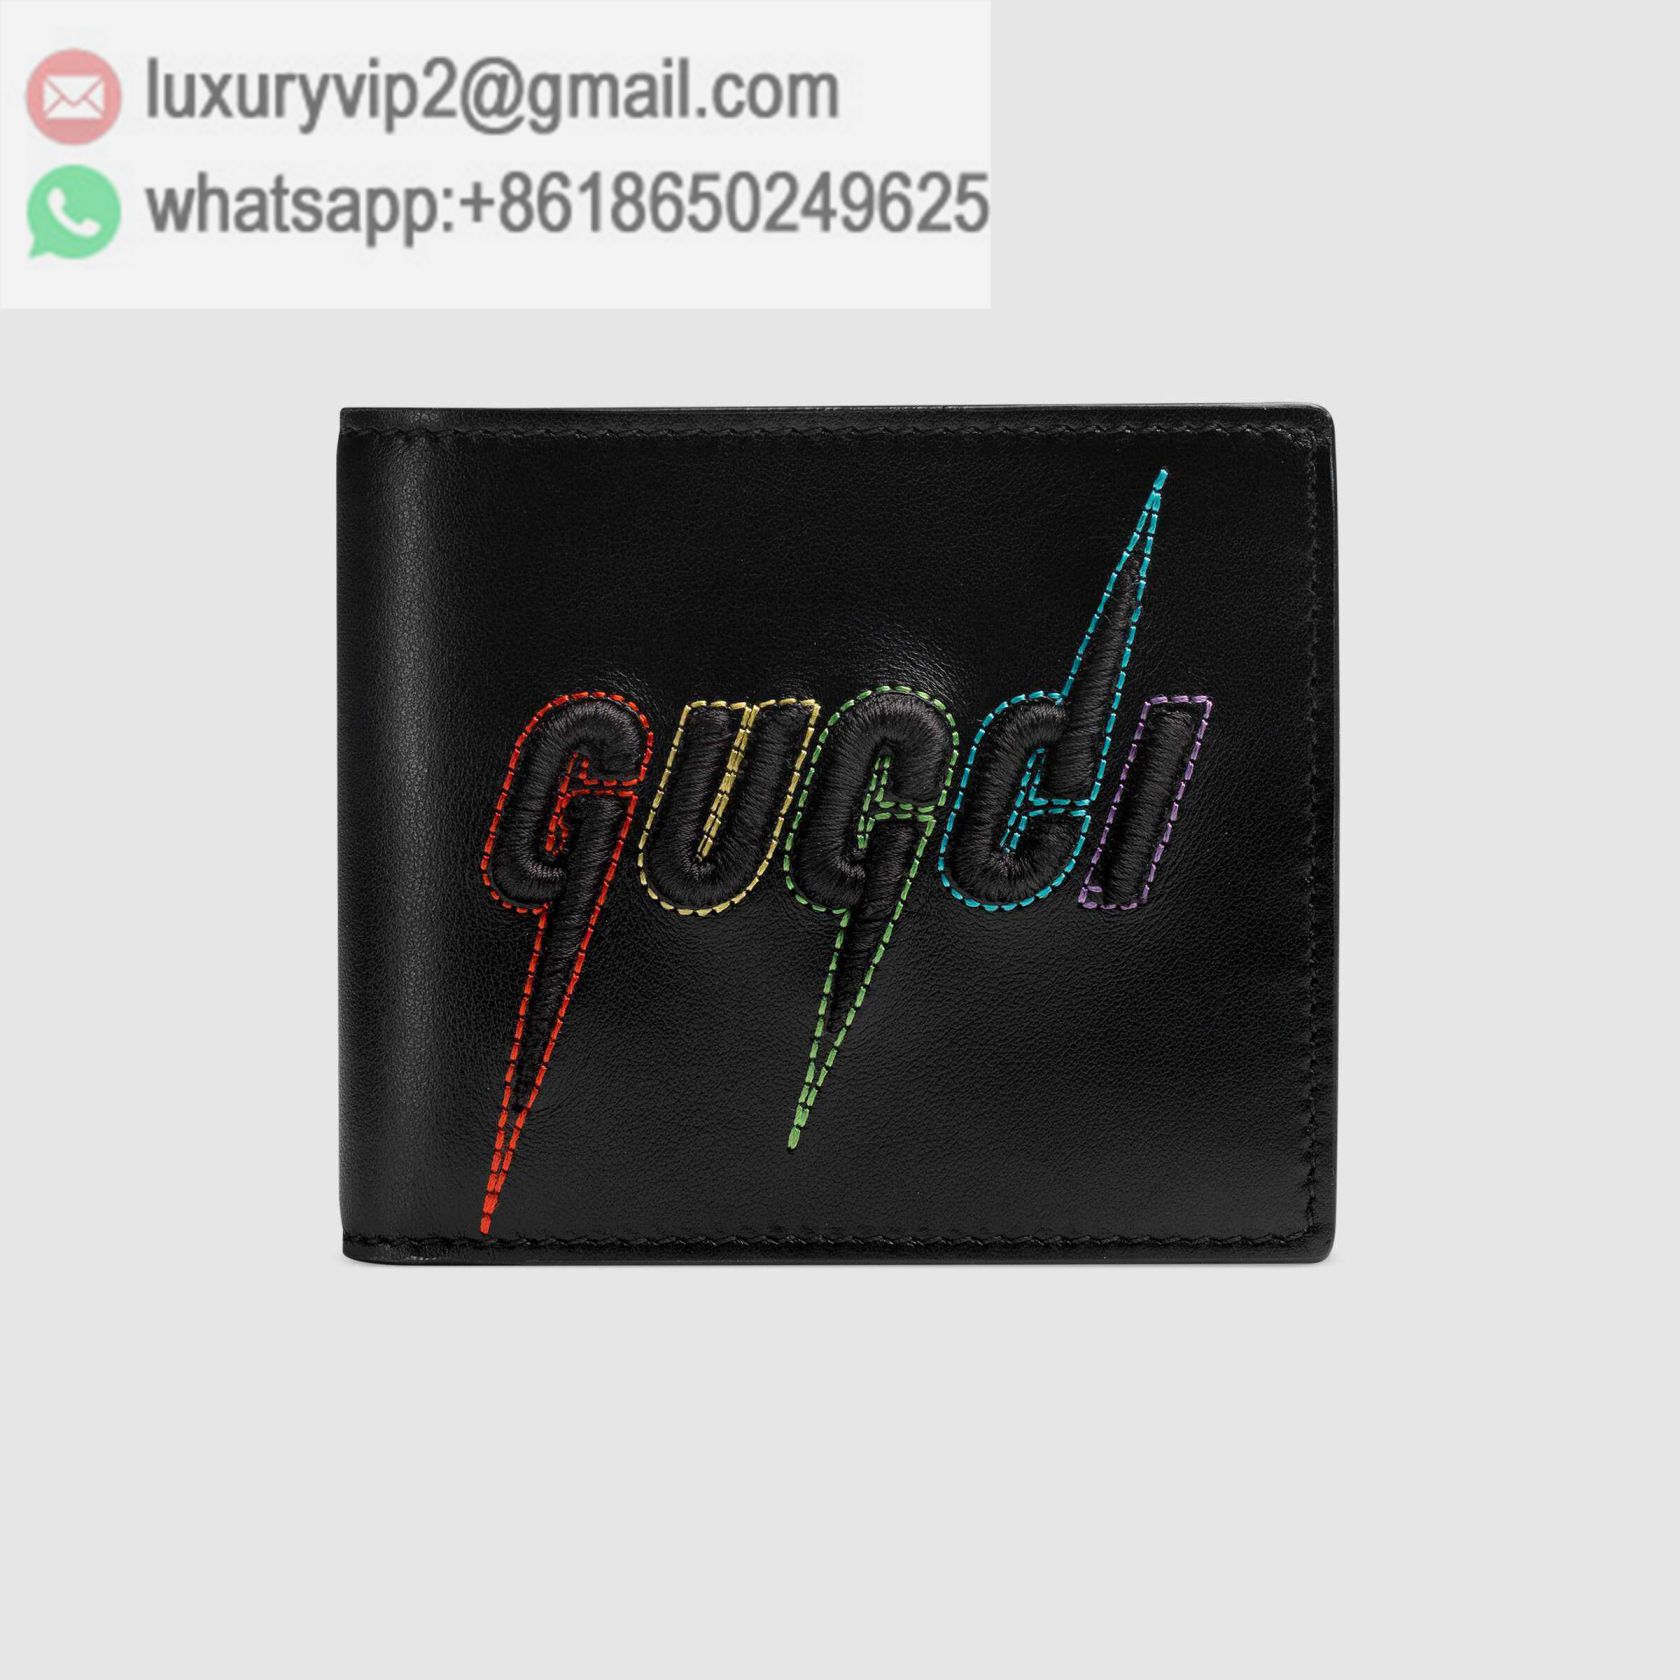 GG Embroidery 597674 DTDTN 1058 Men Wallets